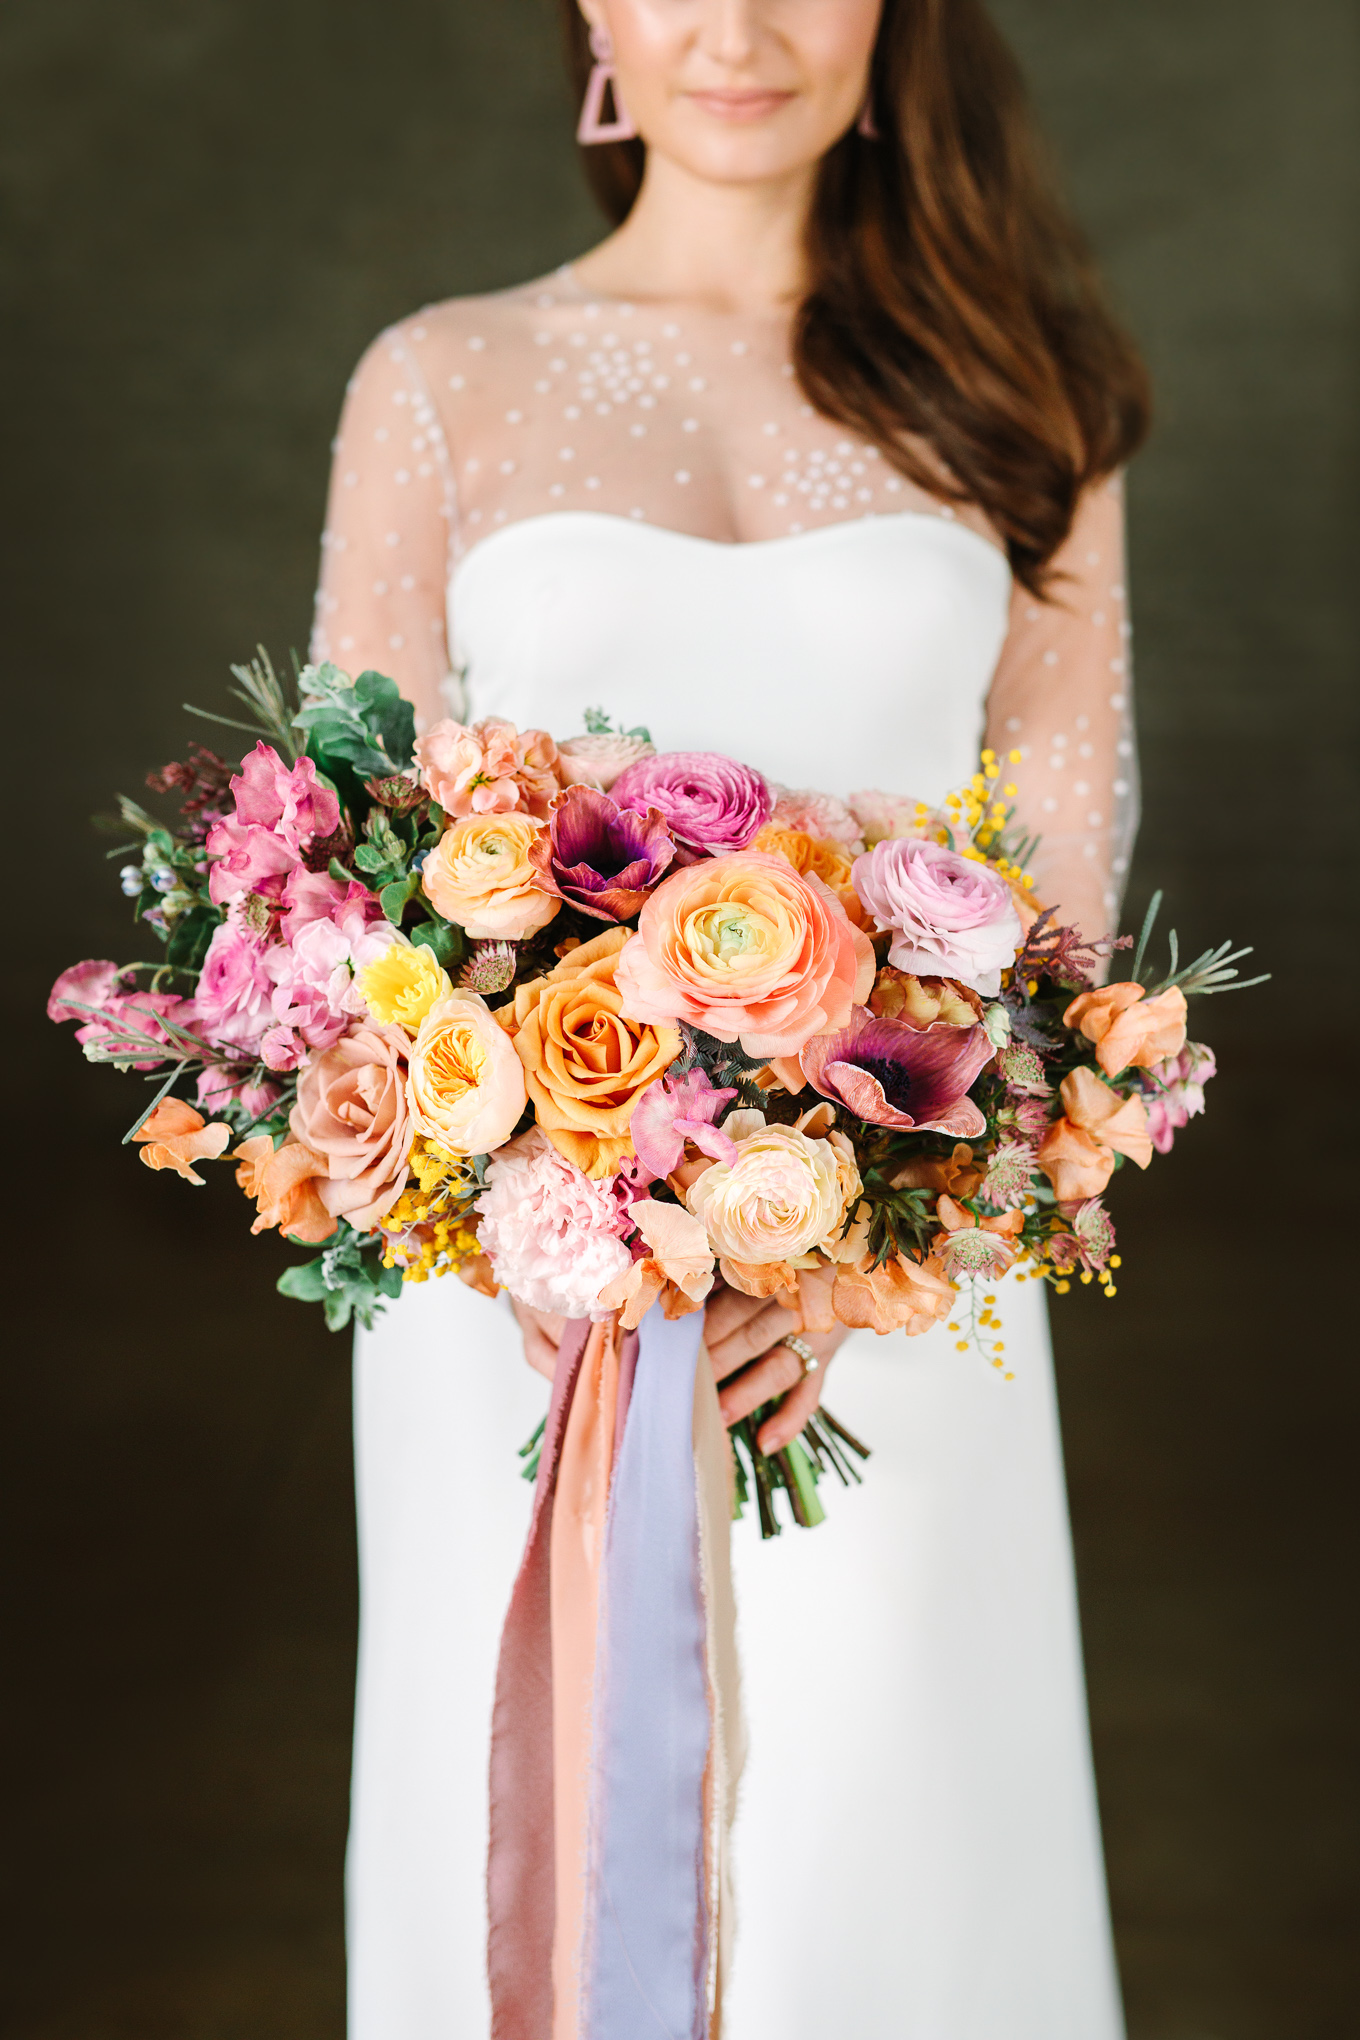 Vibrant pastel wedding flowers | Beautiful bridal bouquet inspiration and advice | Colorful and elevated wedding photography for fun-loving couples in Southern California | #weddingflowers #weddingbouquet #bridebouquet #bouquetideas #uniquebouquet   Source: Mary Costa Photography | Los Angeles